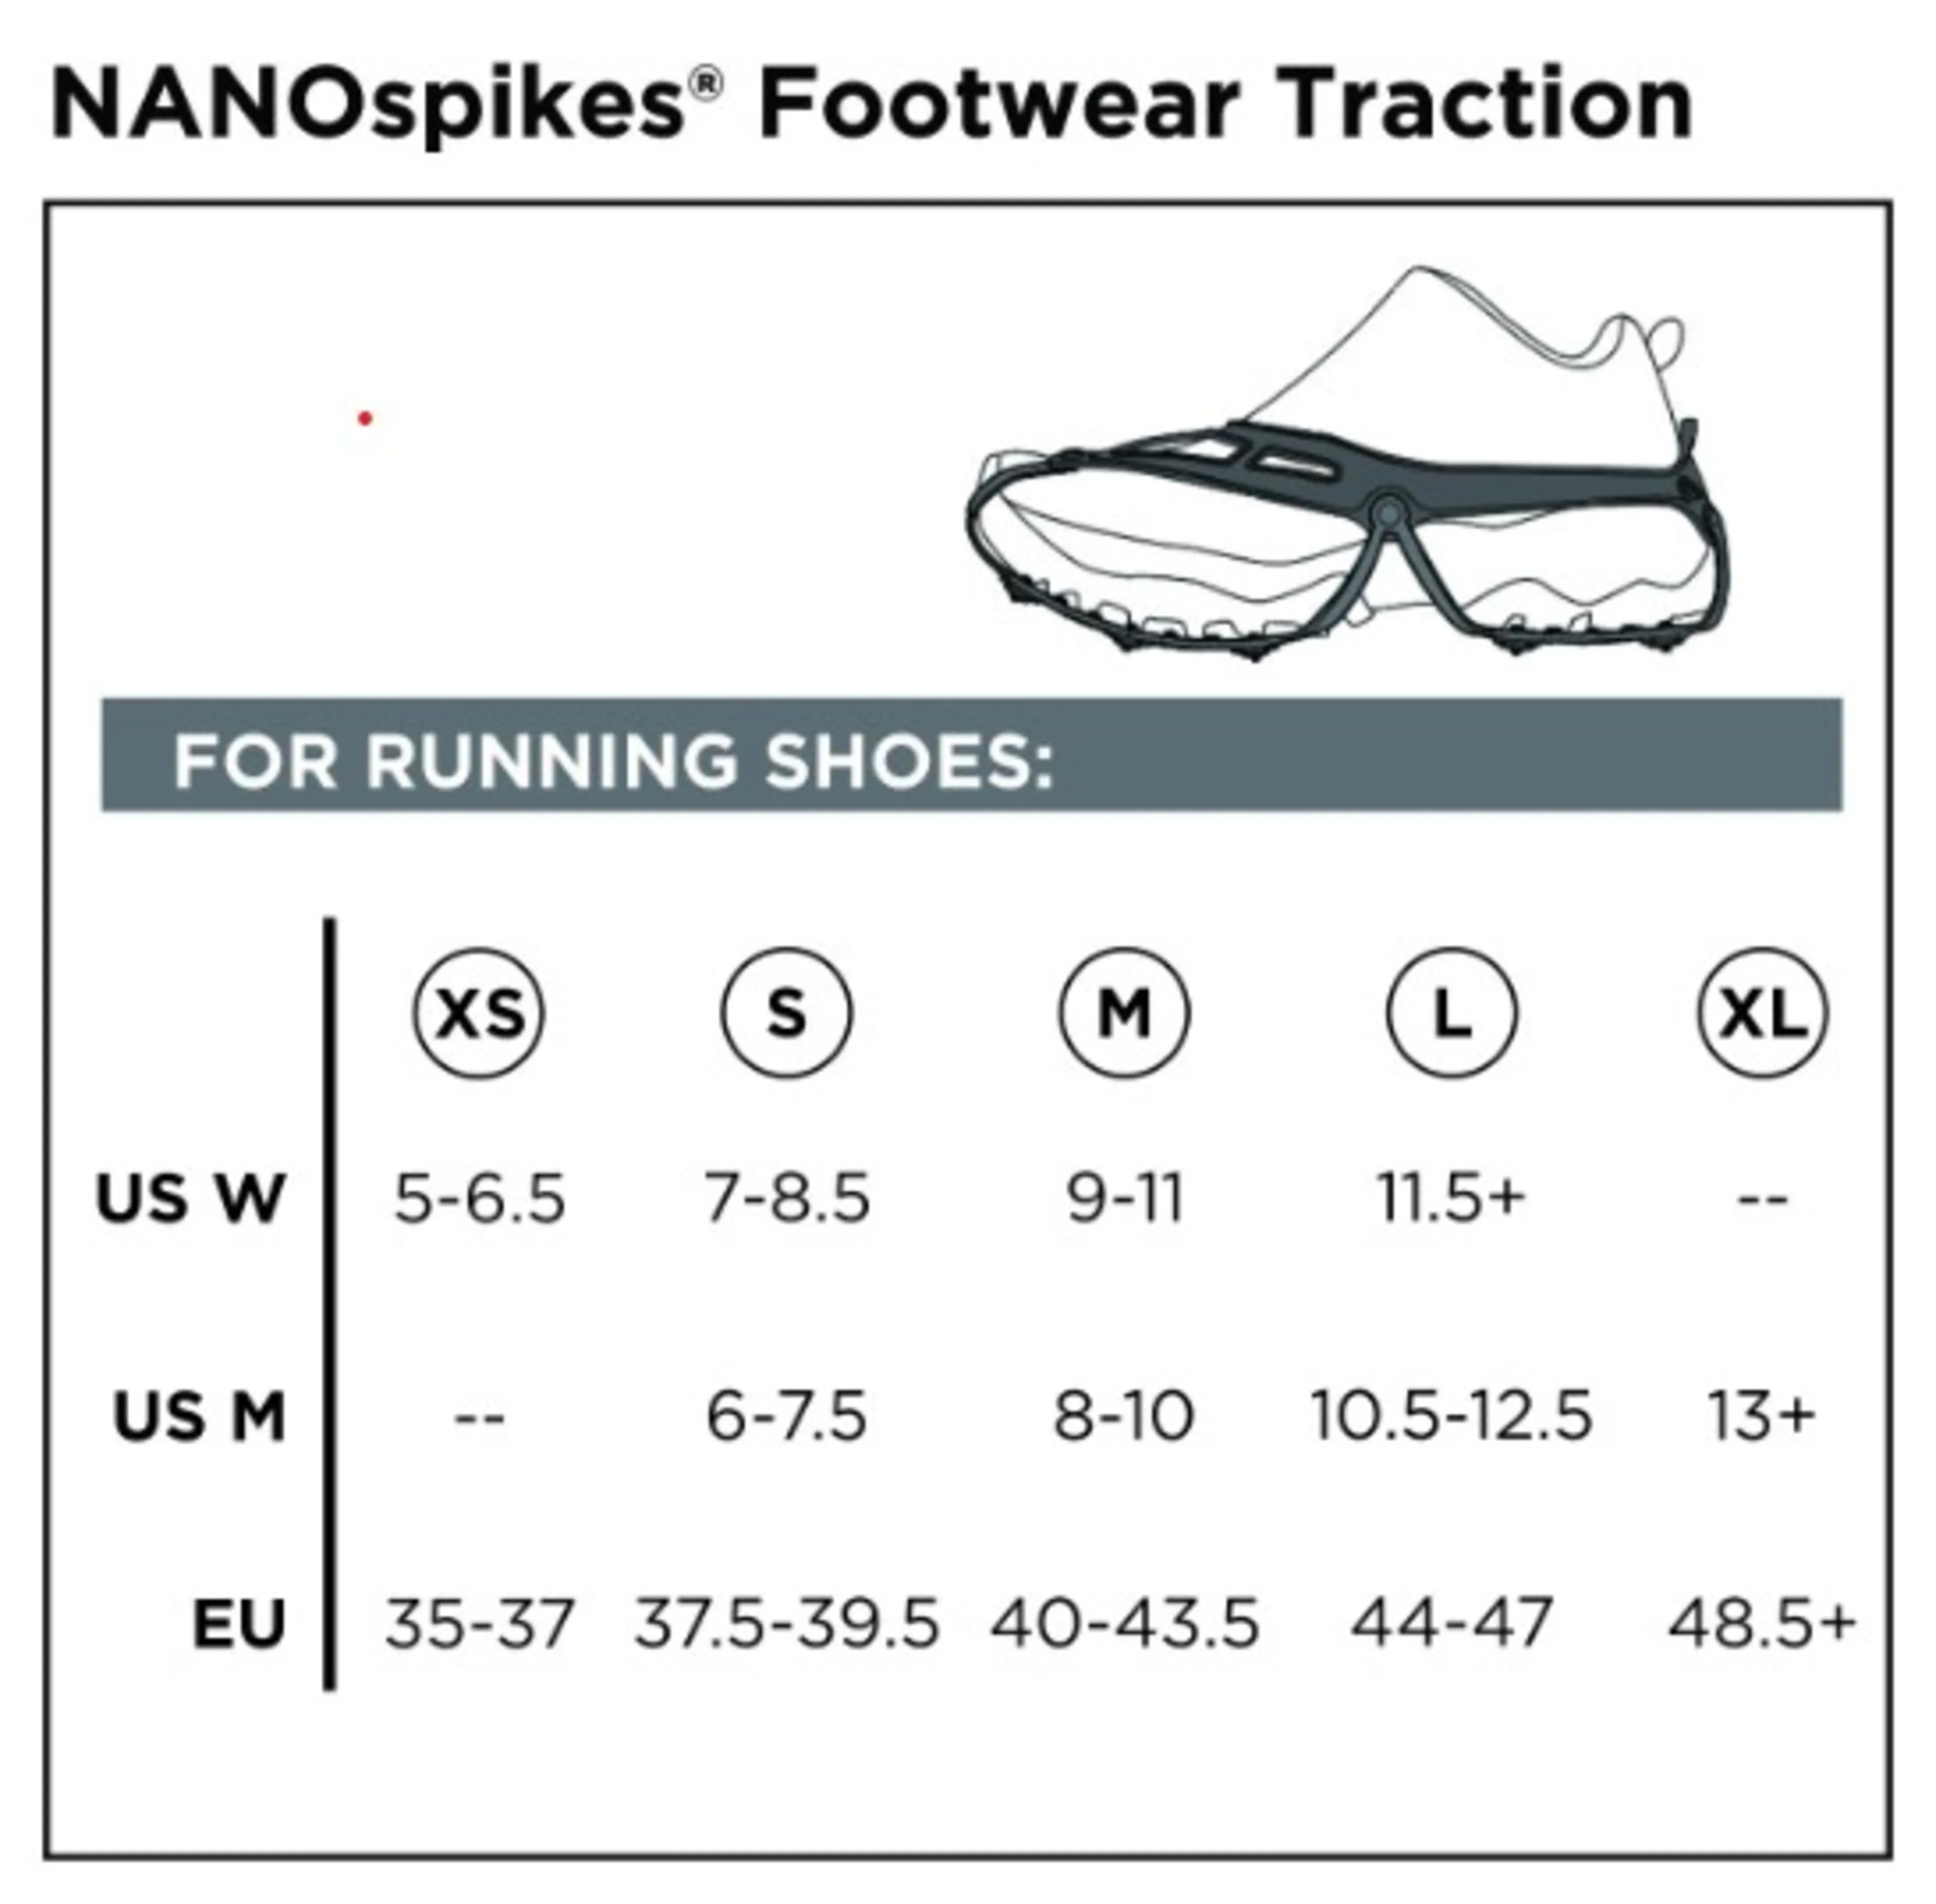 NANOspikes Footwear Traction v2, L